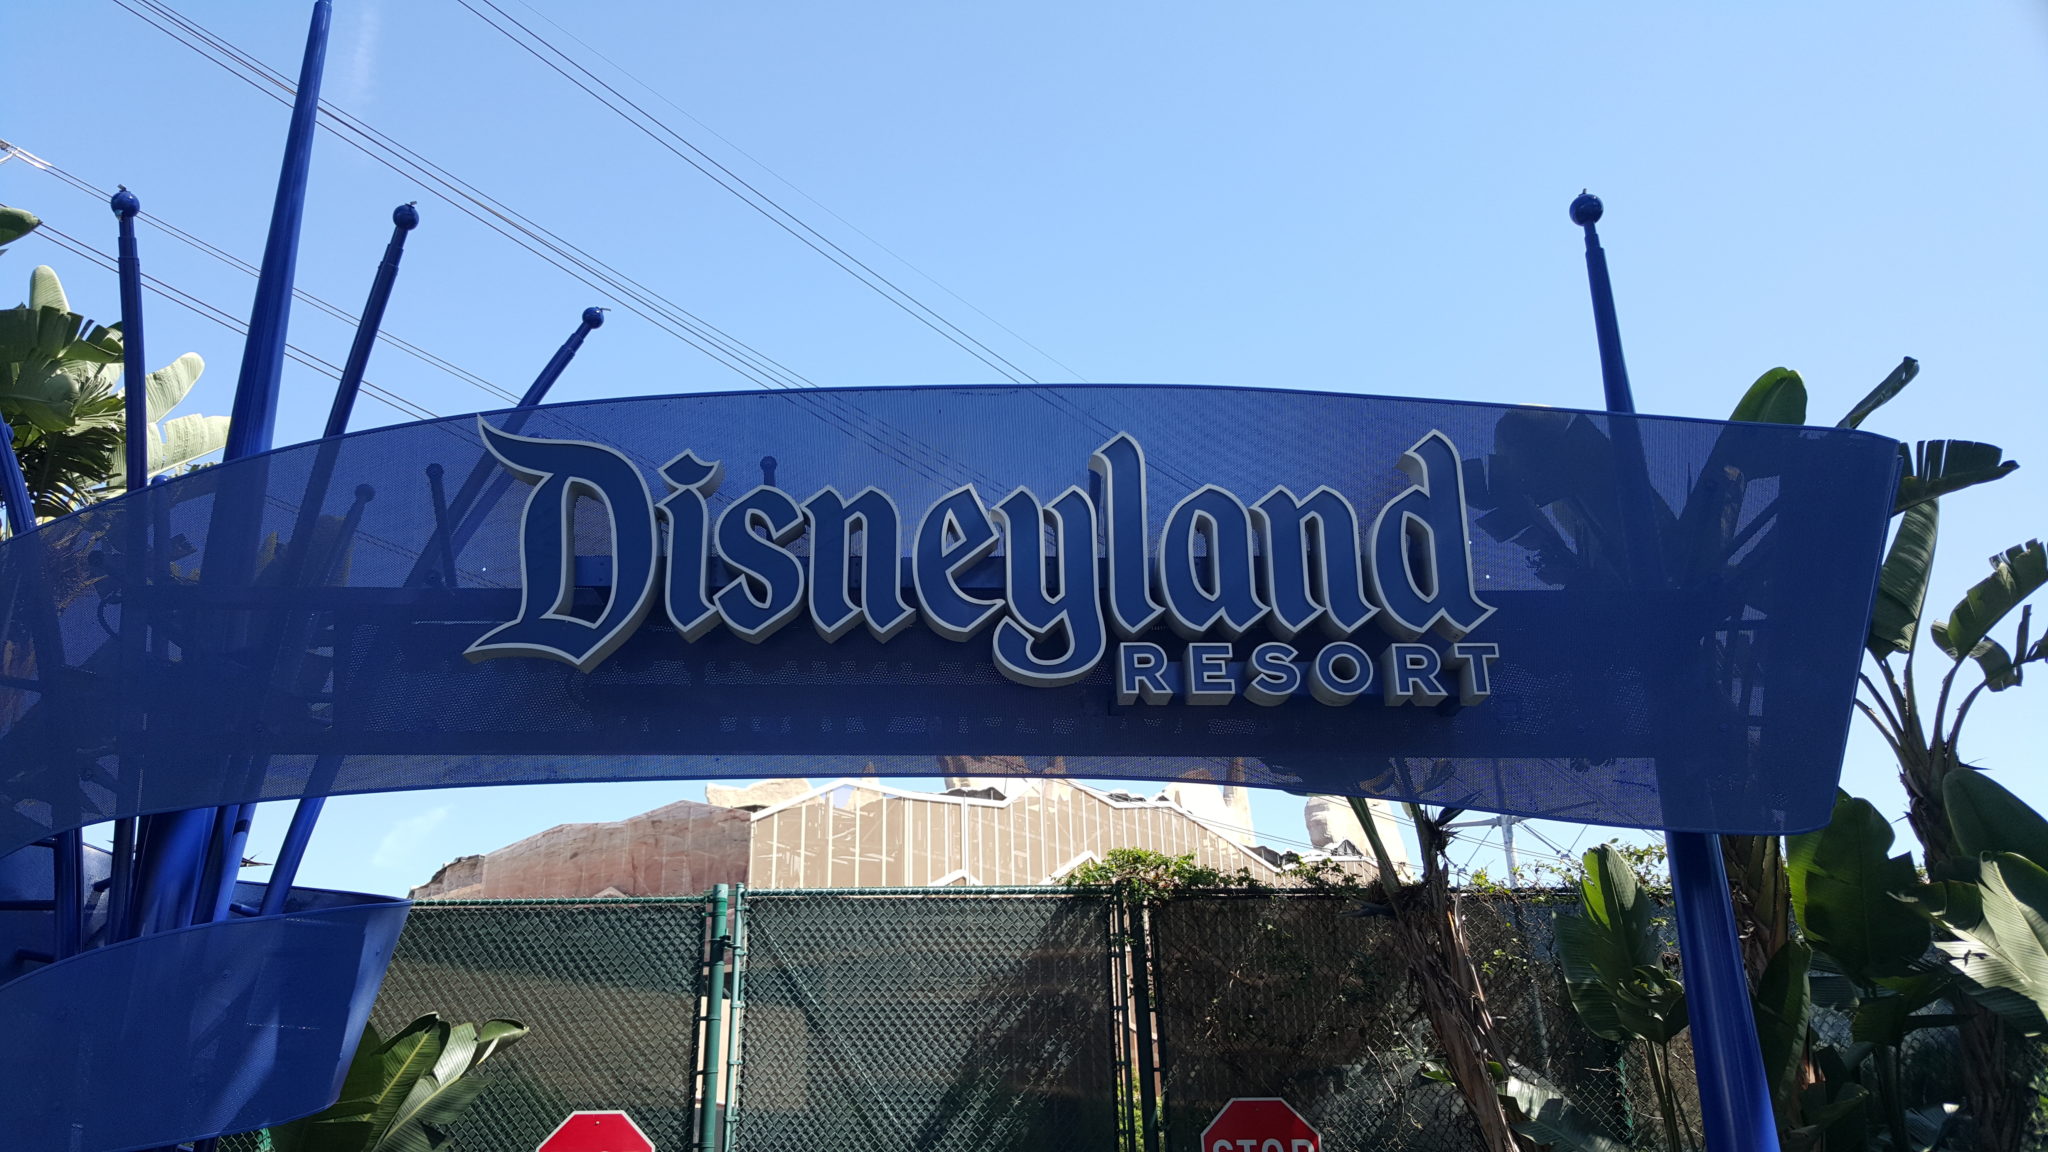 Man jumps to his death at Disneyland Parking Structure